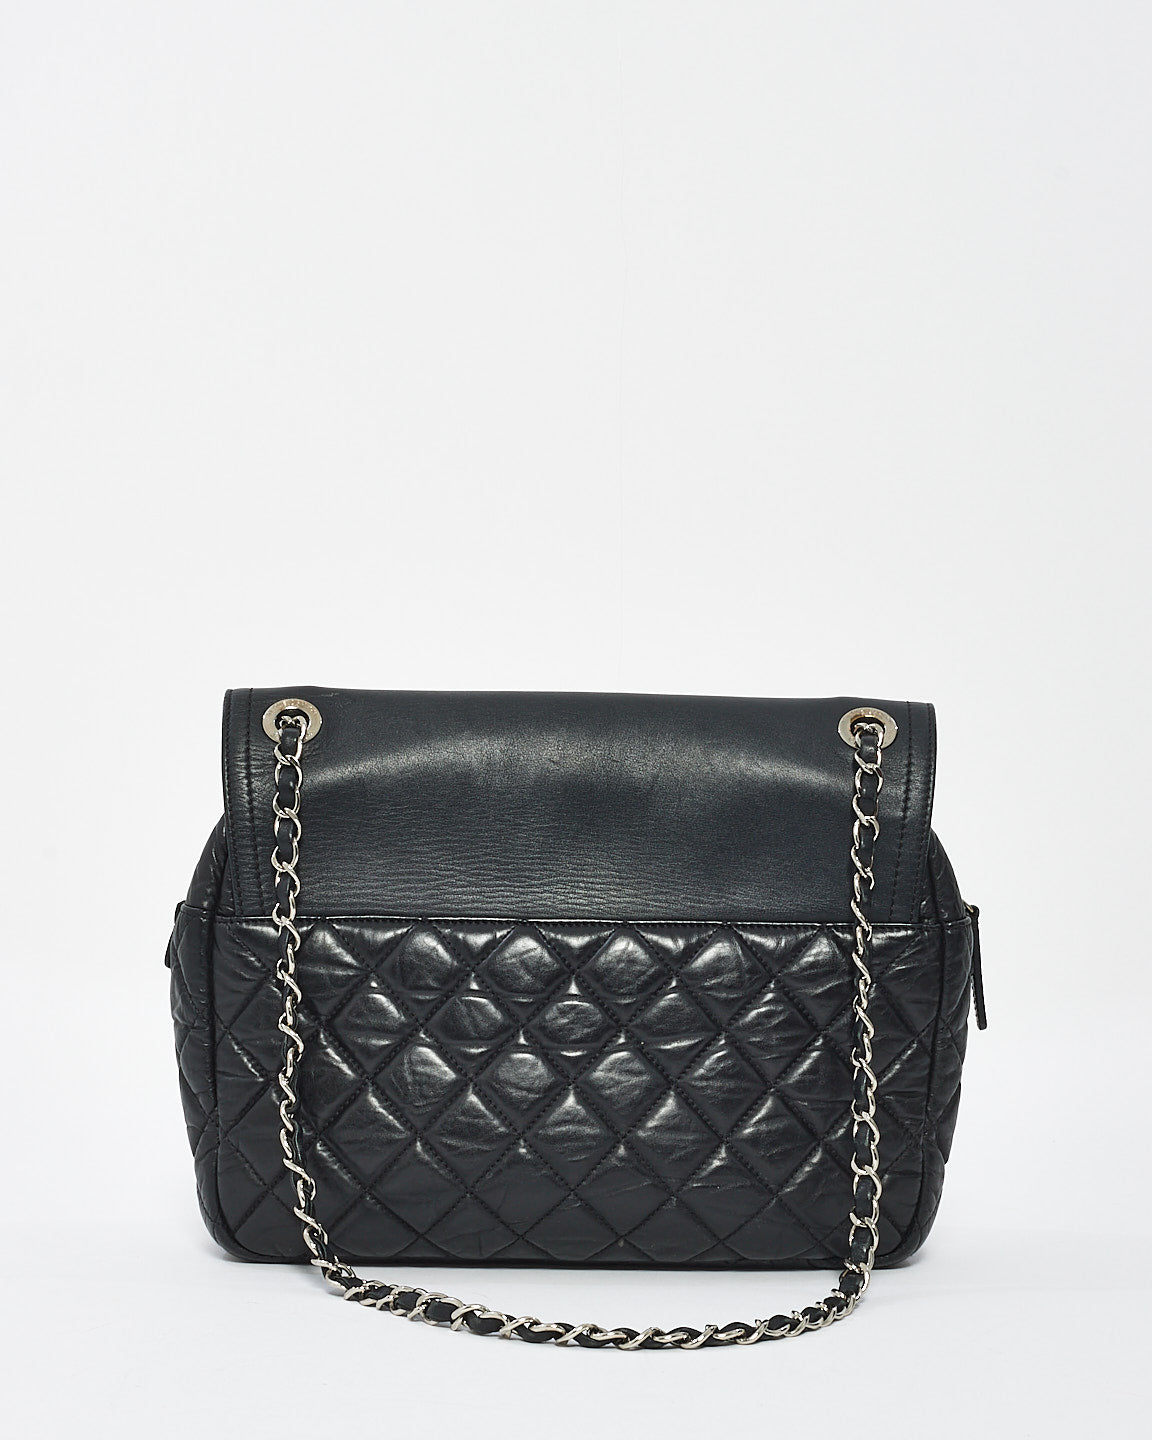 Chanel Black Quillted Leather Easy Zip Shoulder Bag with SHW